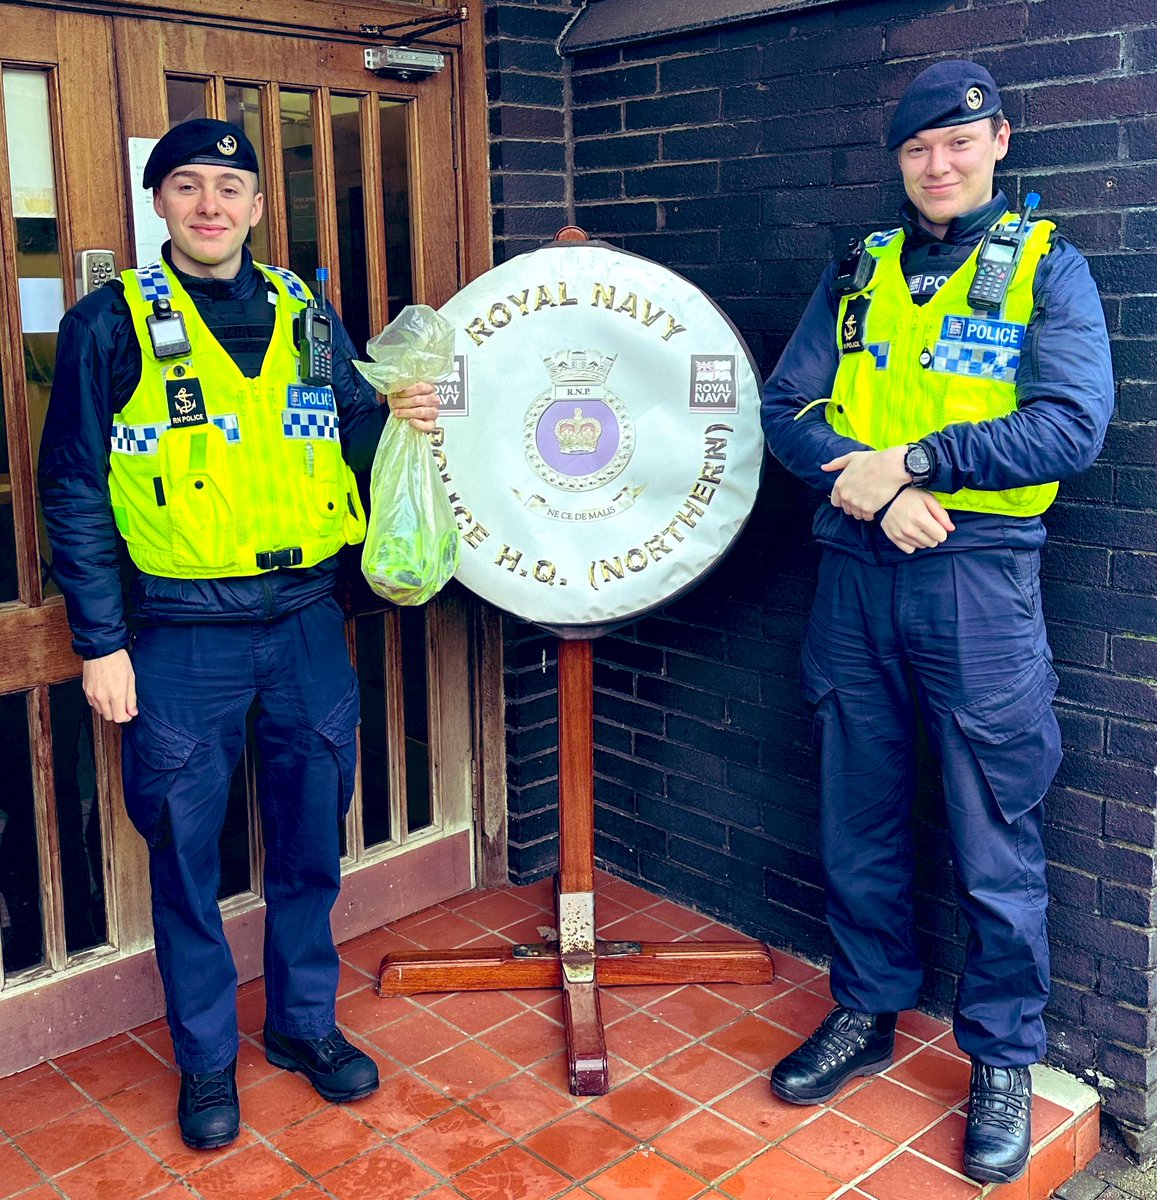 Lighting up the streets of @HMNBClyde 💡 LH(Police) Matthews and LH(Police) Gunn have been distributing high visibility belts to service personnel throughout the base 🚓 This ensures our people remain safe while navigating the less lit areas on foot 🐾 #StaySafe #RNPScotland